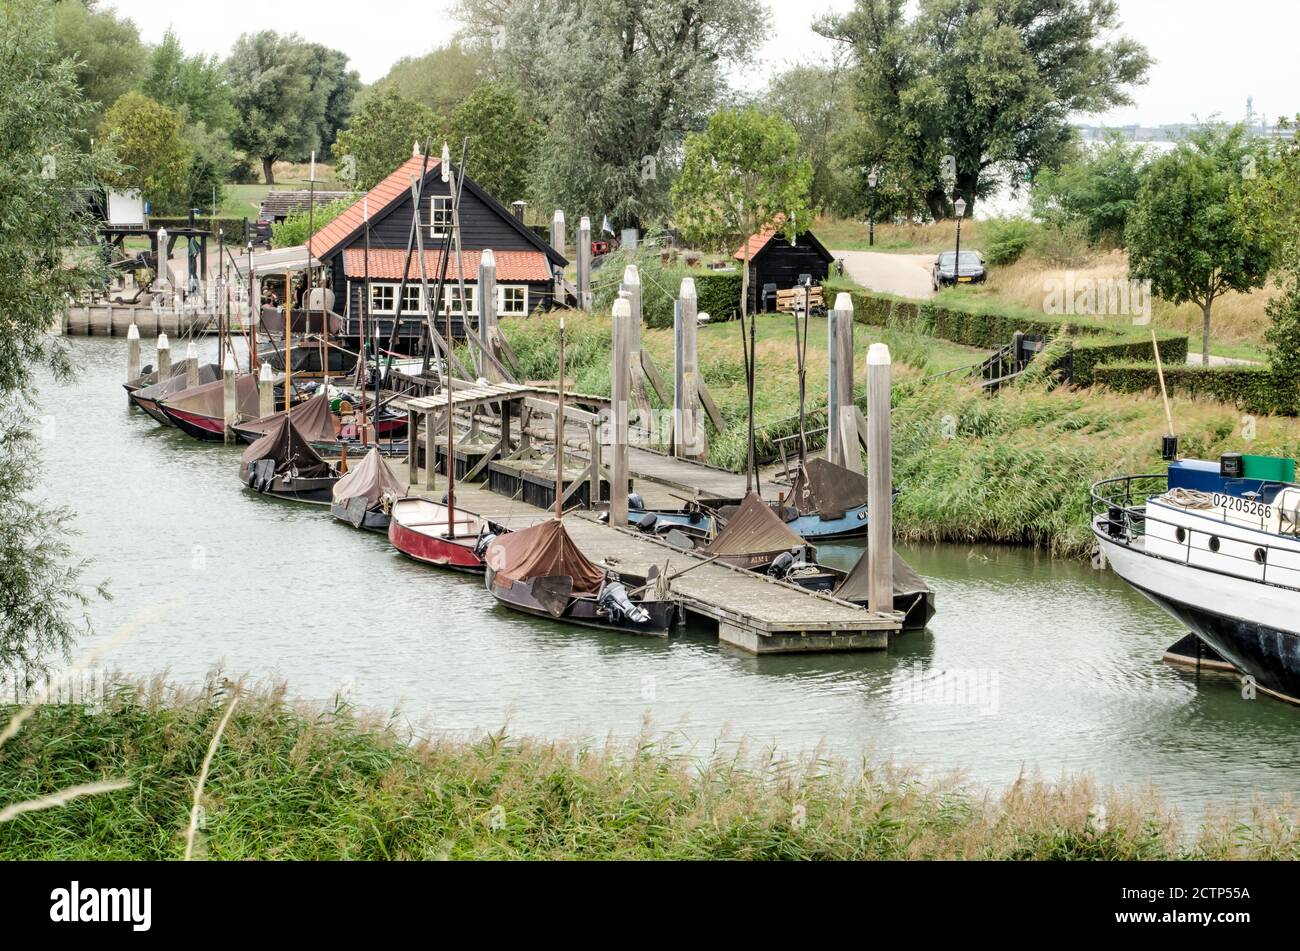 Woudrichem, The Netherlands, September 23, 2020: view of wooden buildings and a pier with small boat in a canal with green banks just outside the old Stock Photo